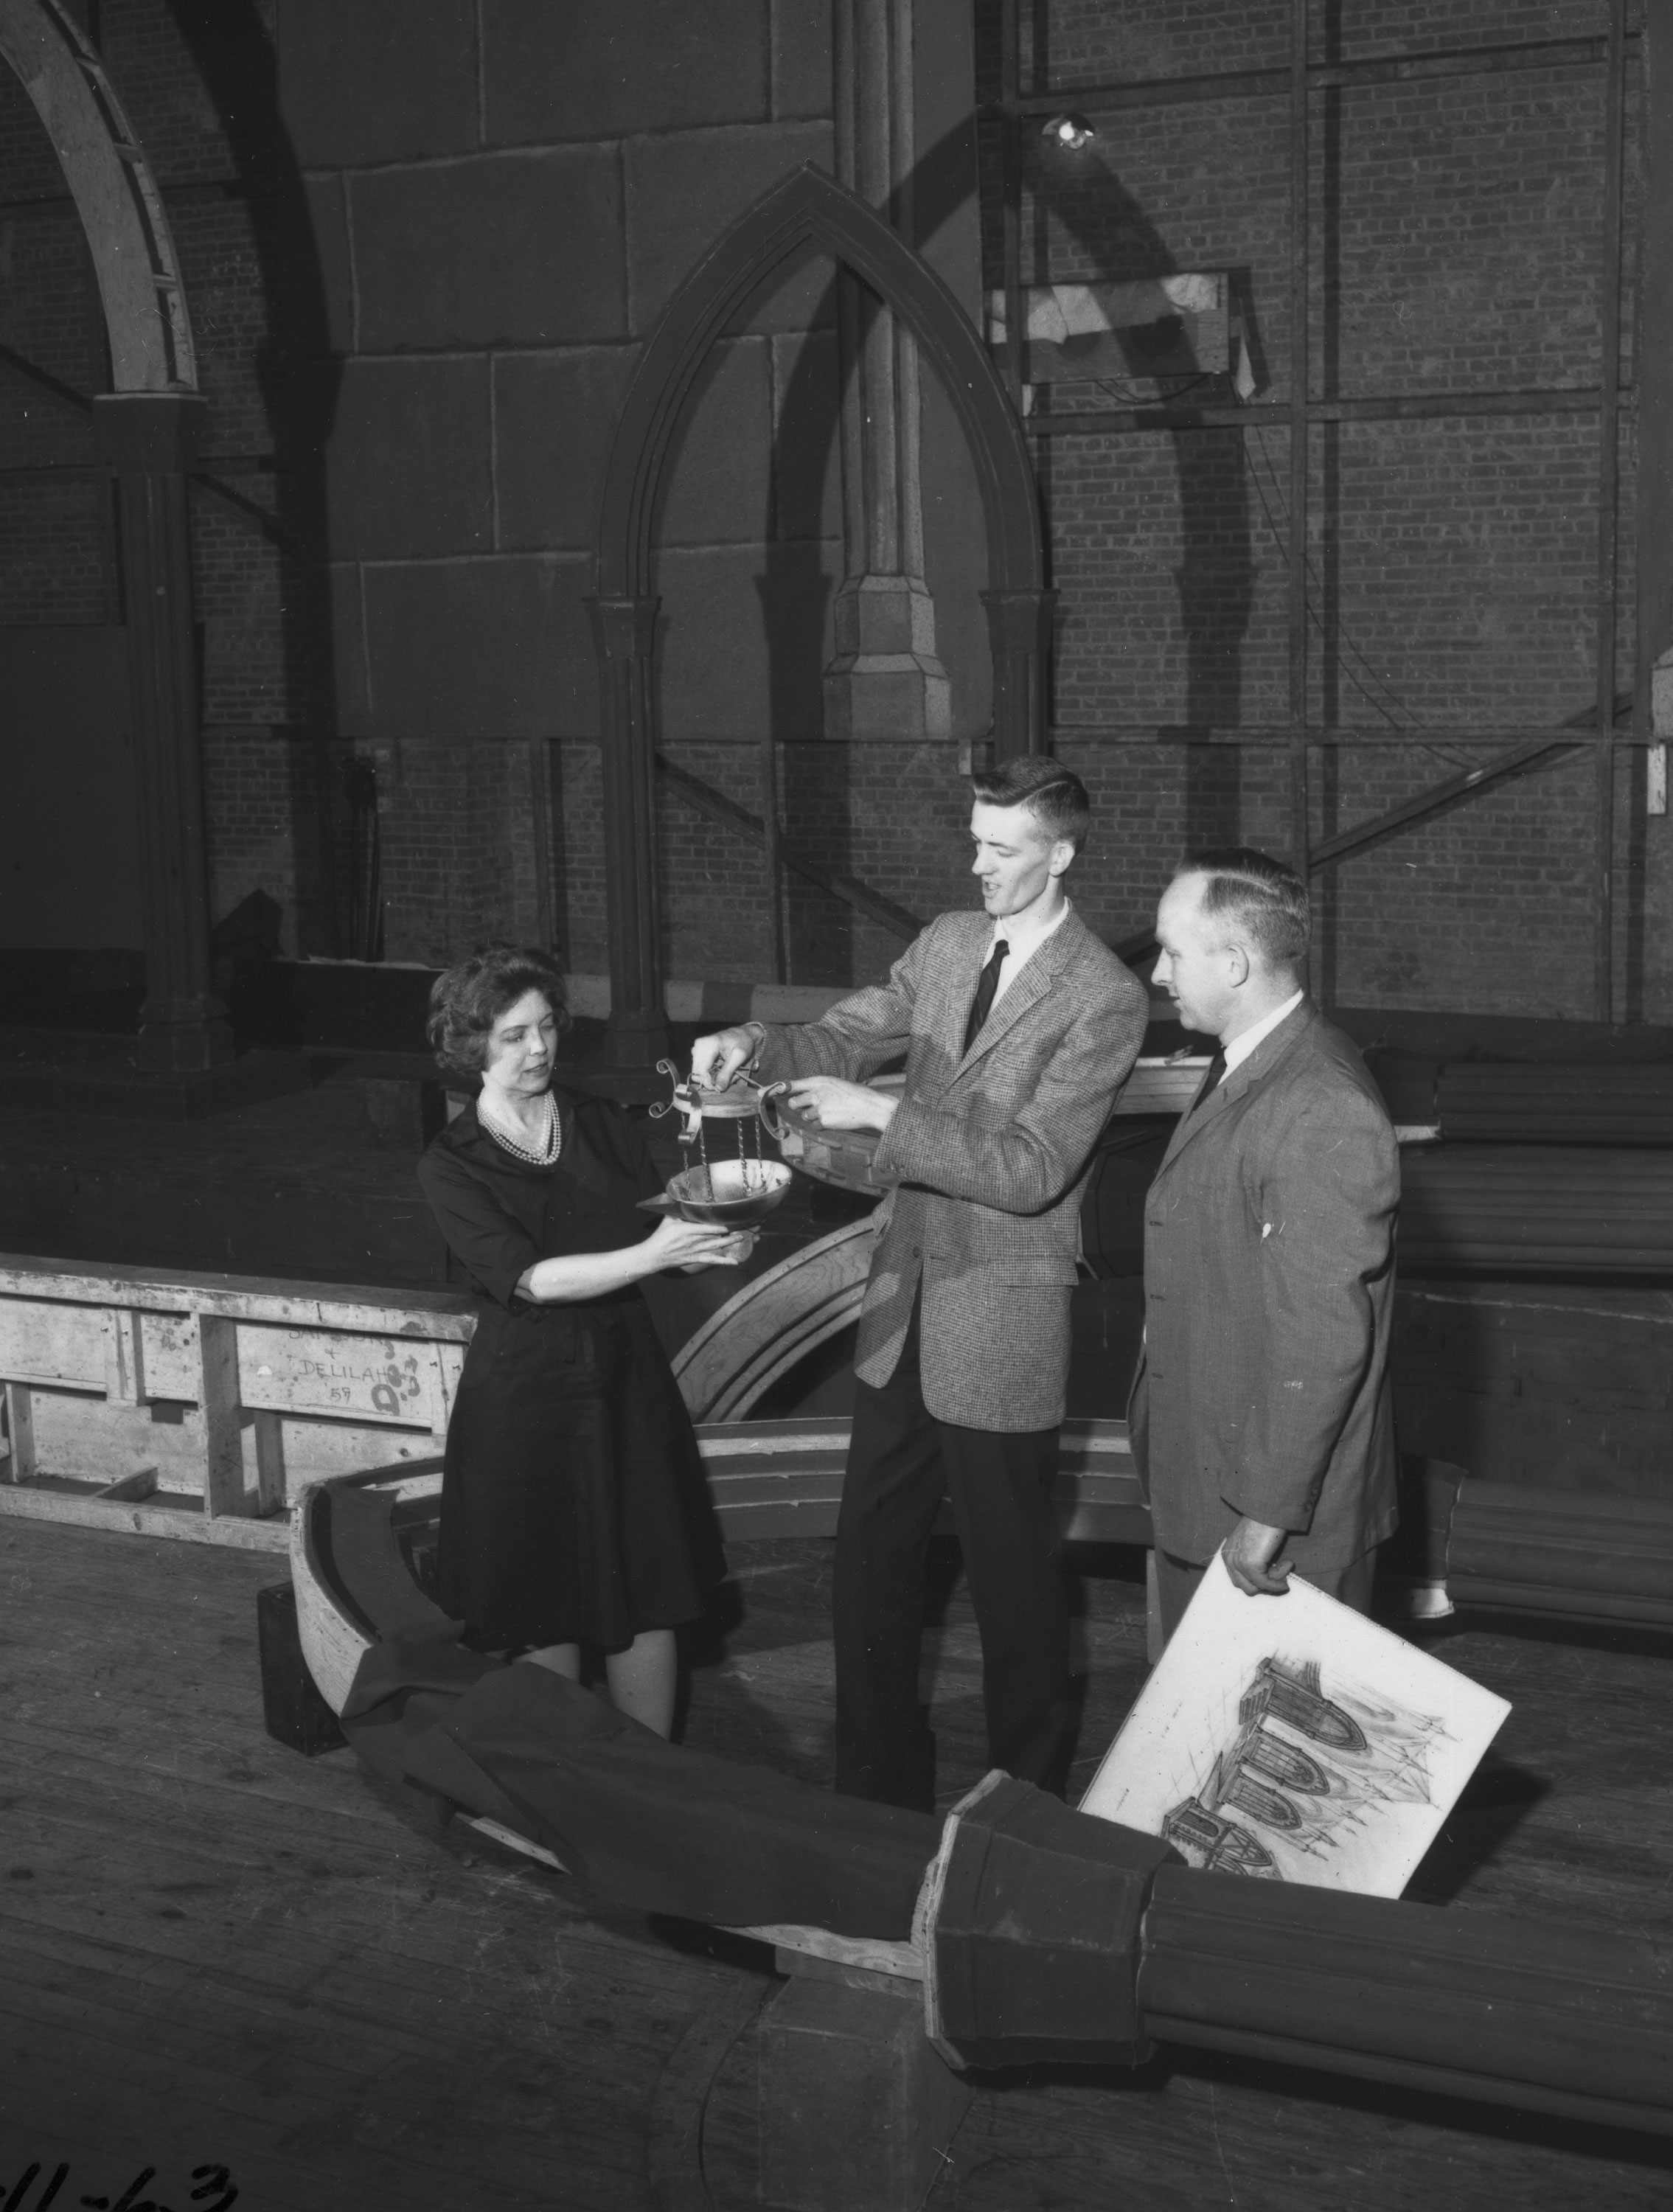 Photo of Eva Carrier, Dwight Gustafson and Mel Stratton on Rodeheaver stage, c. 1960